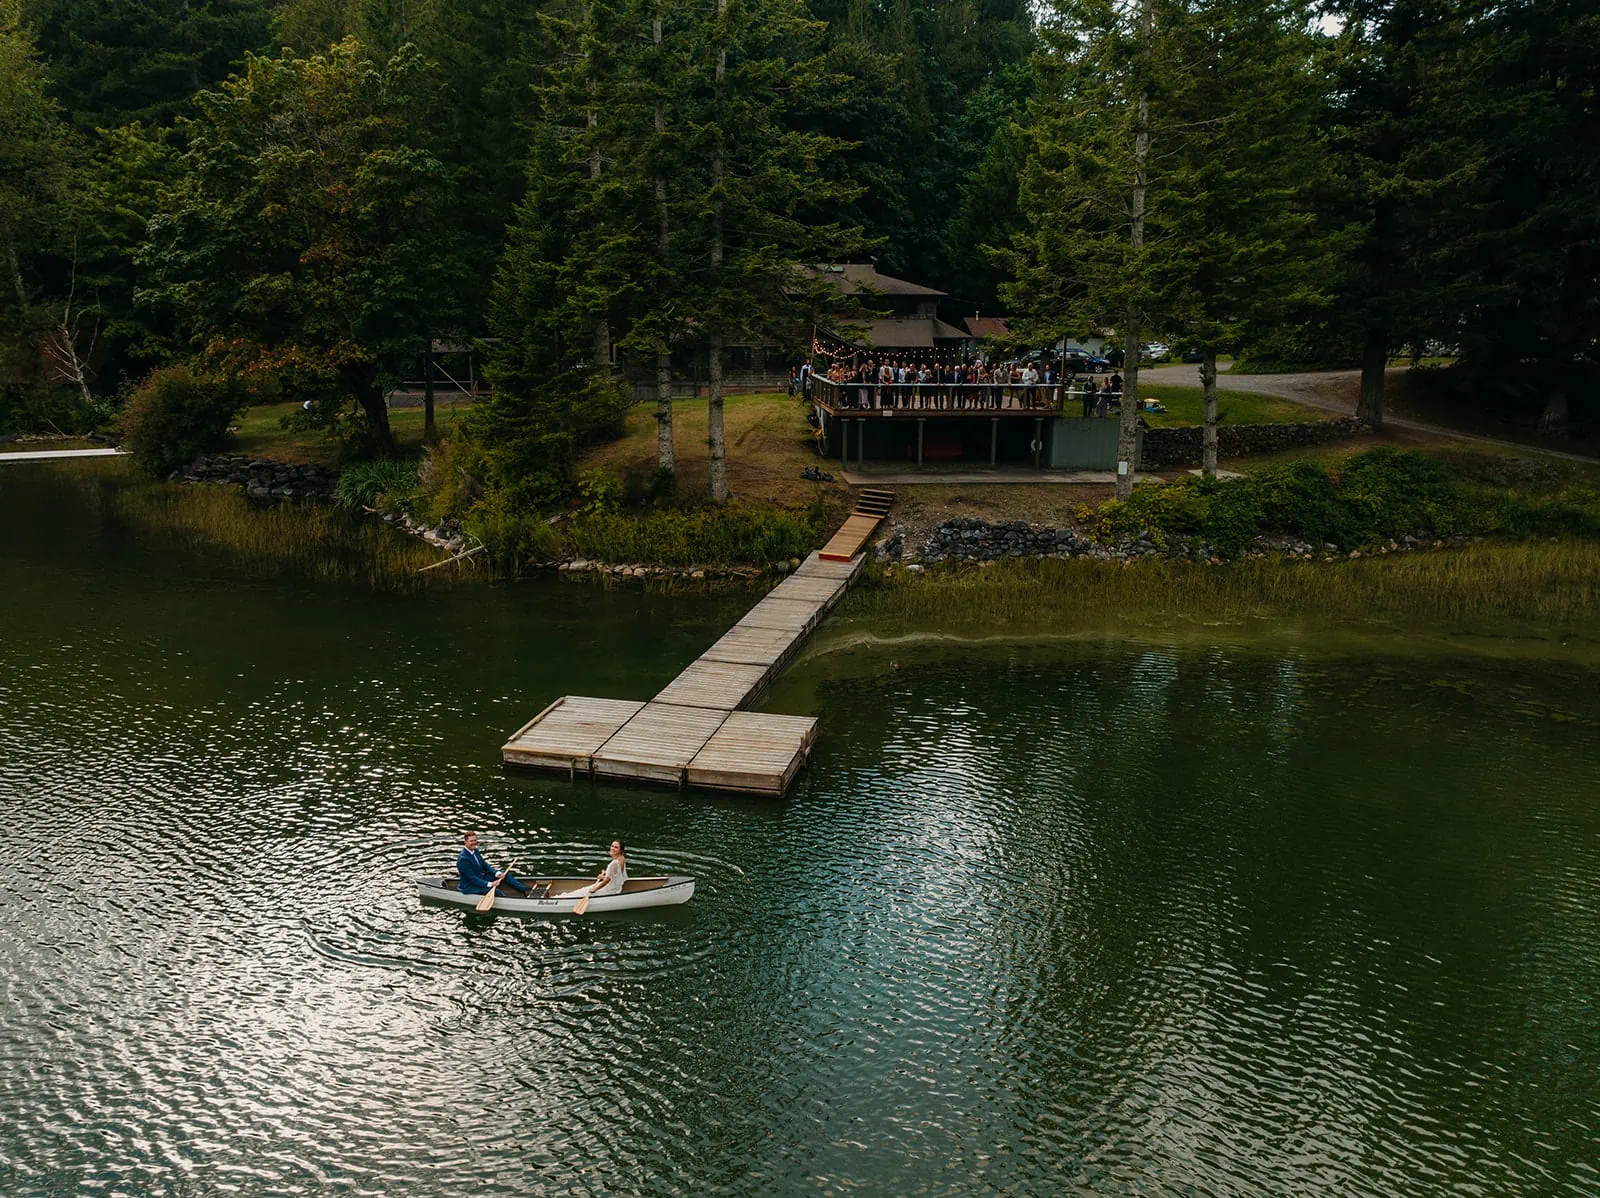 a bride and groom canoe on a lake together while their guests look down on them from a deck